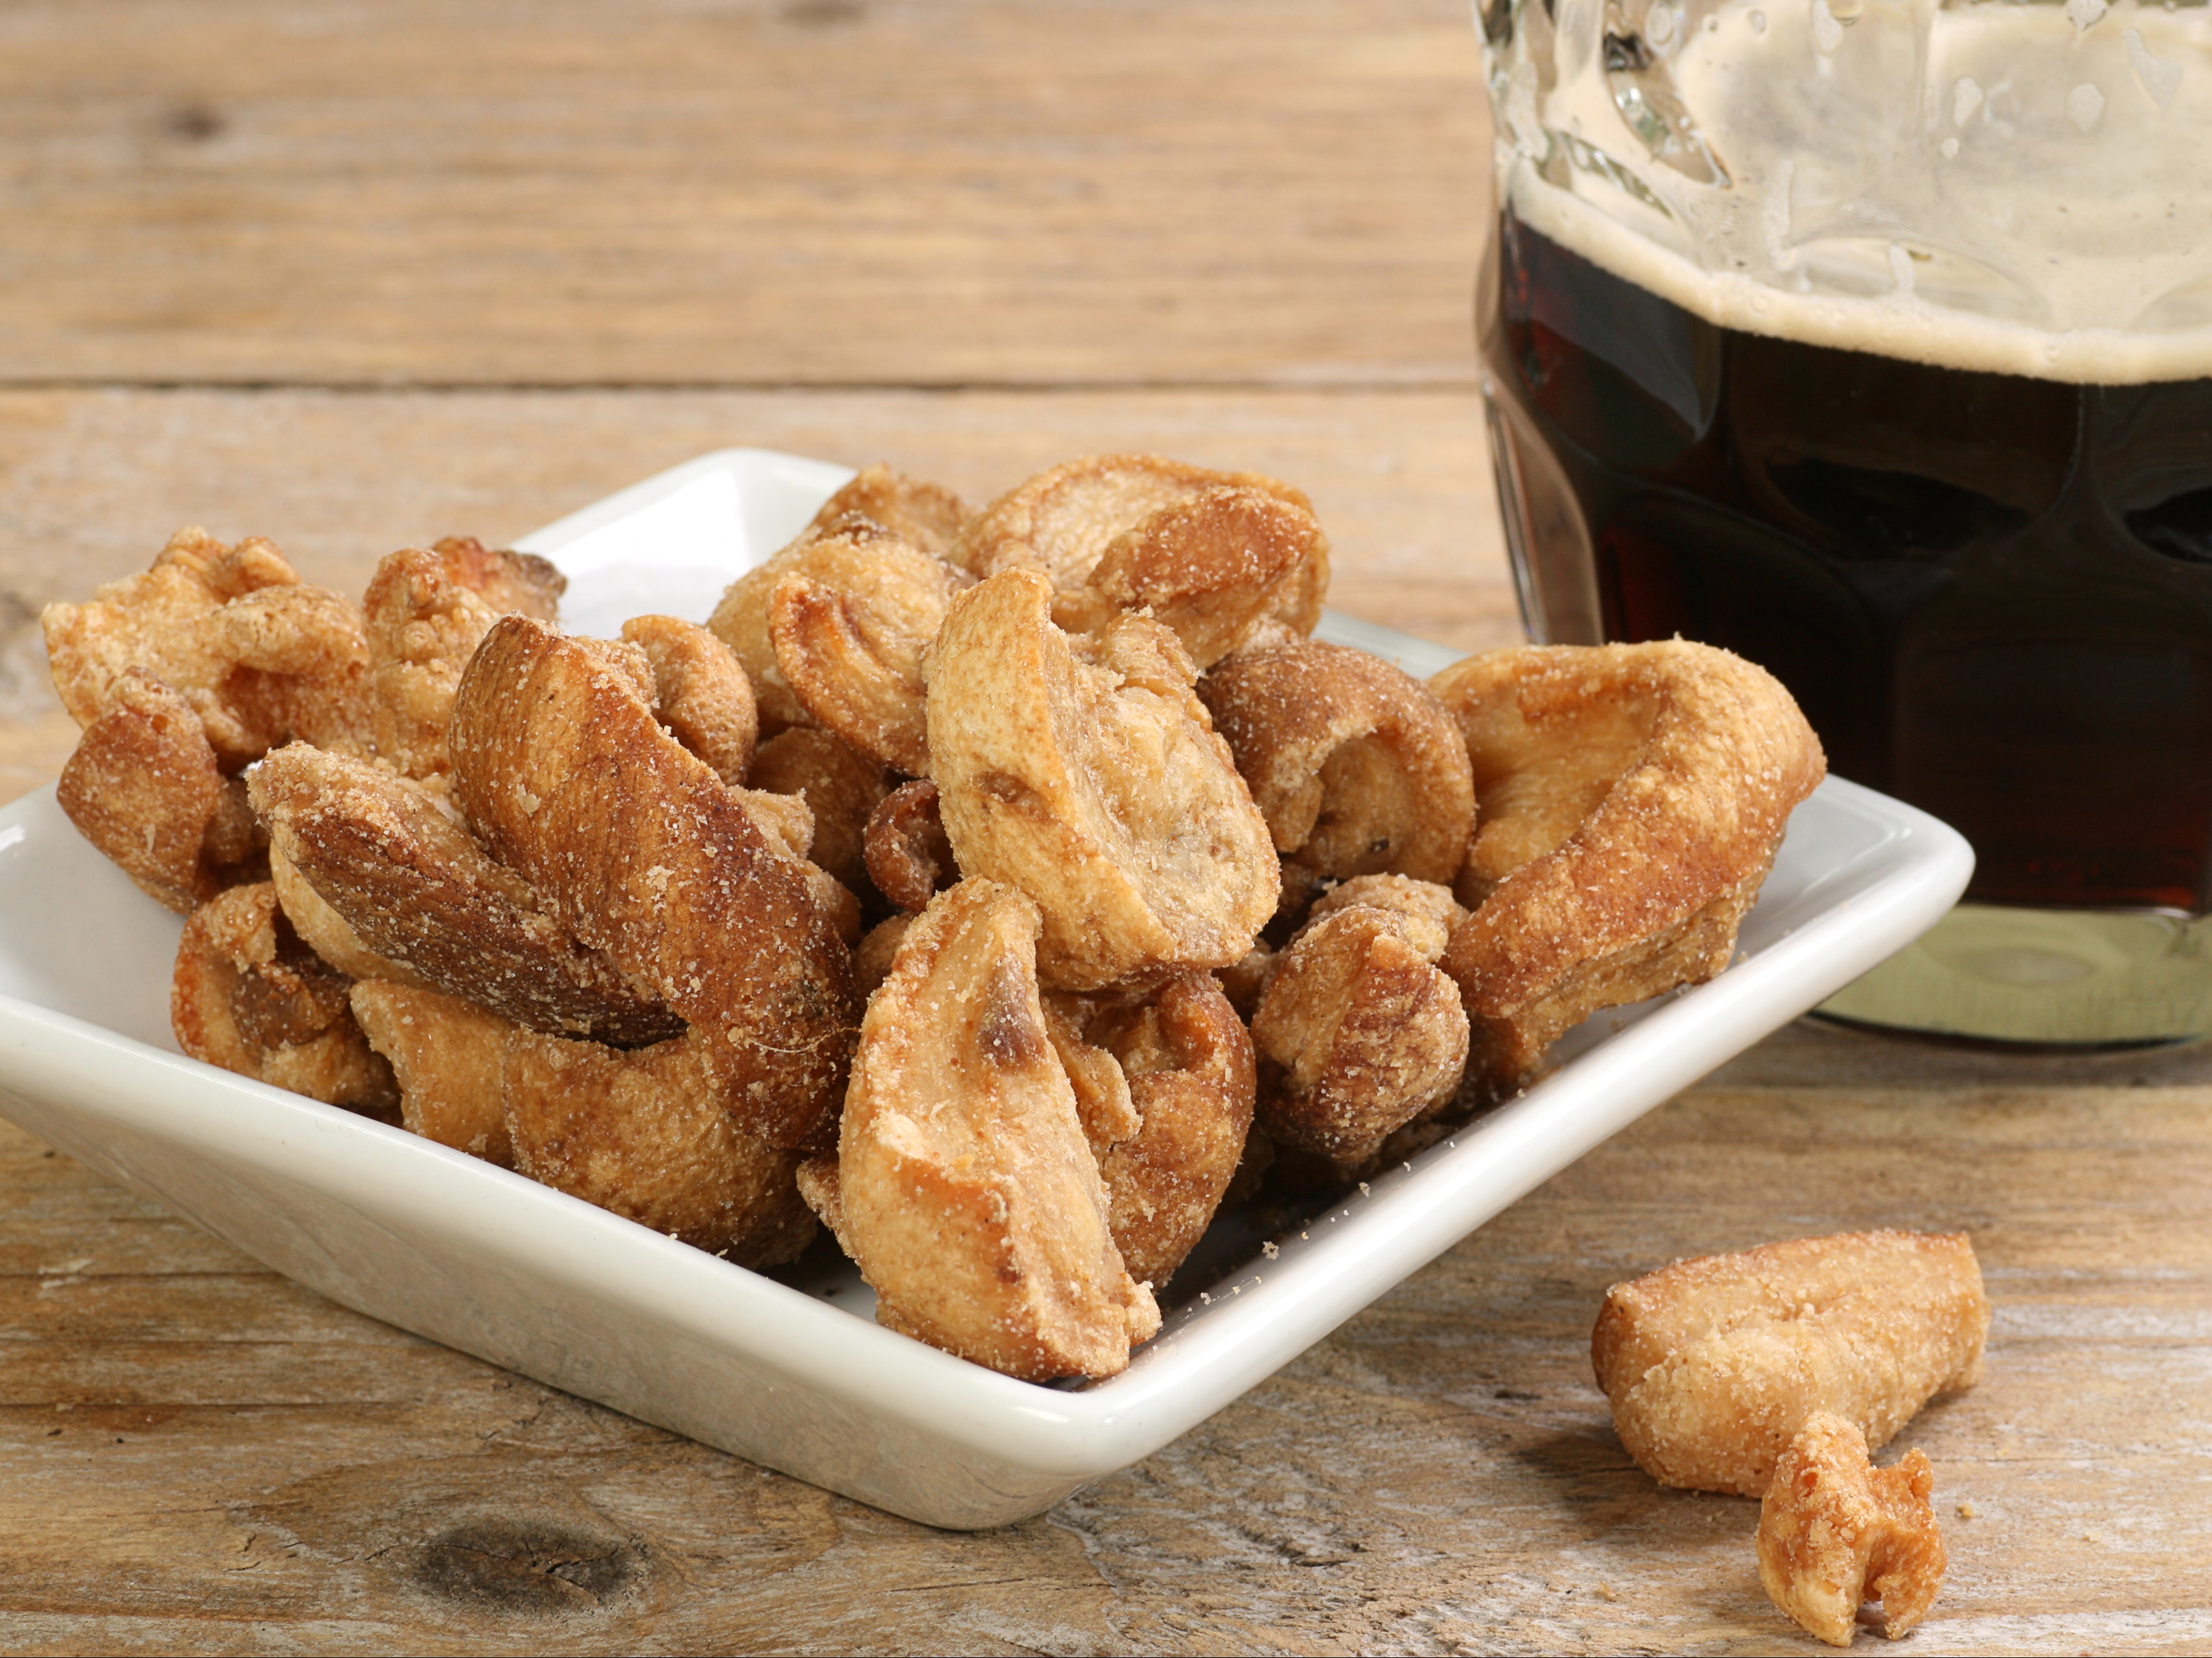 Batches of pork scratchings have been linked to scores of salmonella cases in the UK